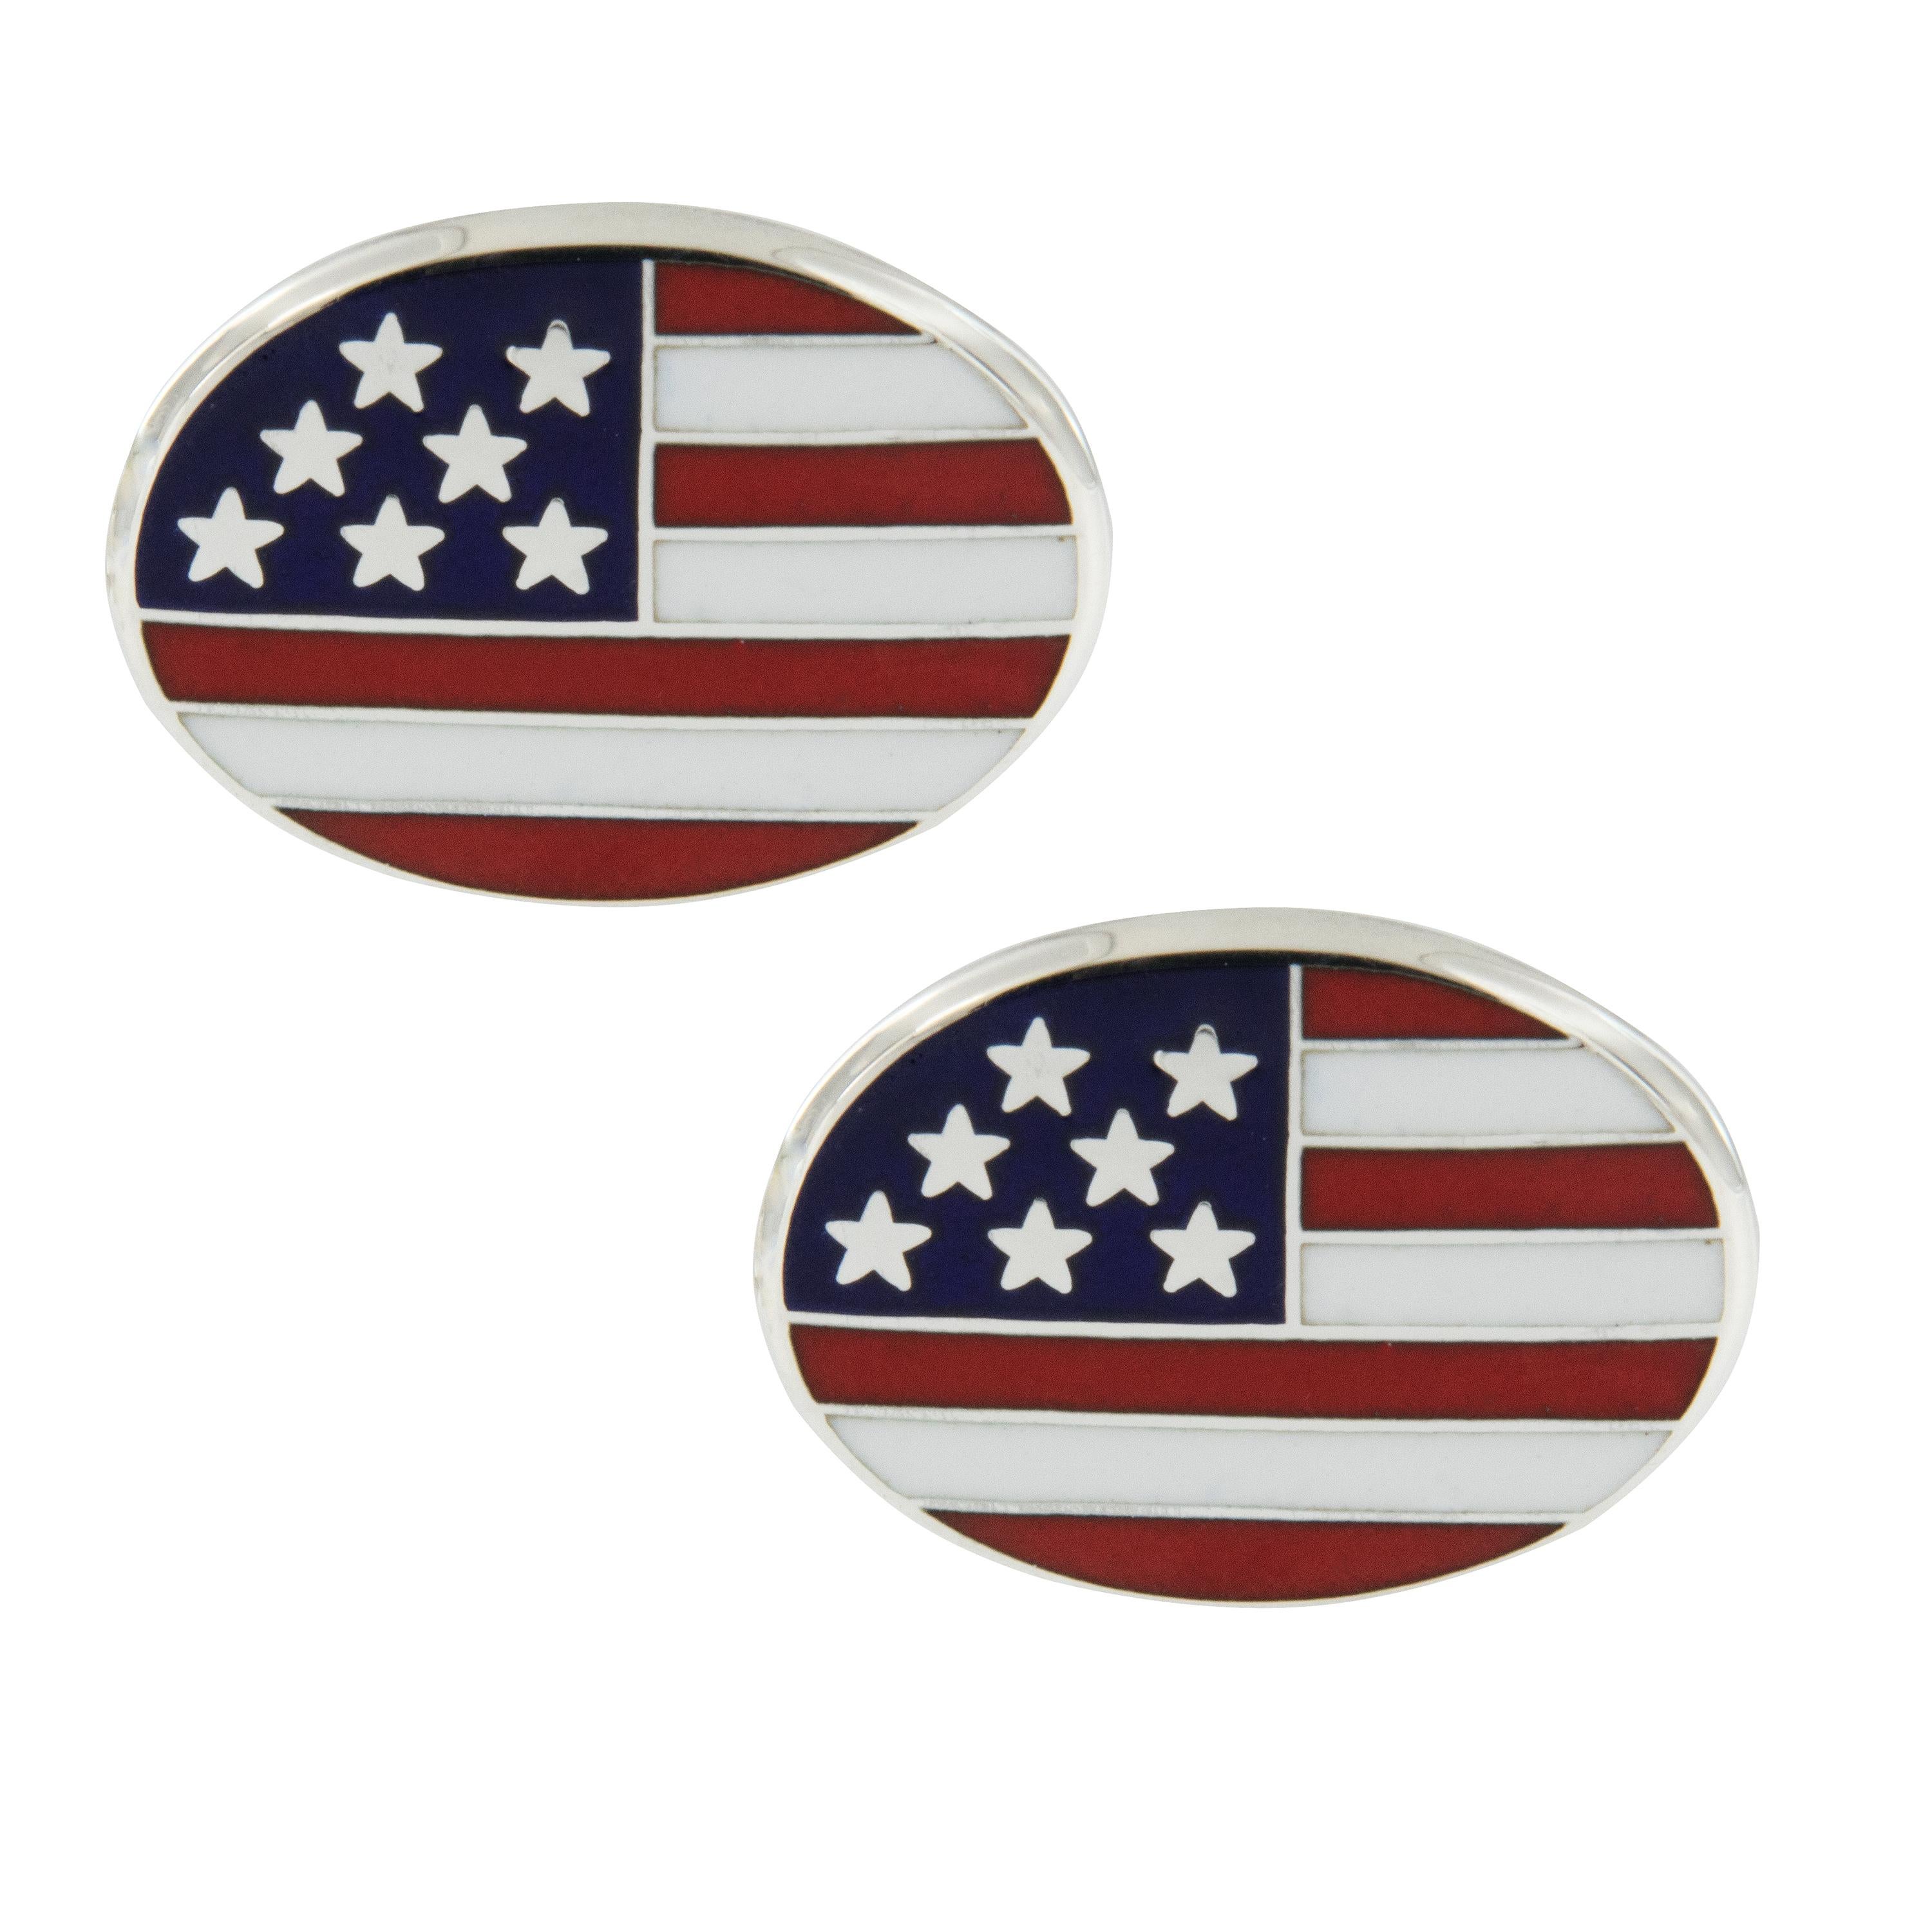 Show your patriotism with these spectacular handmade sterling silver enameled oval cufflinks by Tiffany & Co.! These handsome pieces with enameled flag of the United States of America can be worn with pride & will set off your outfit like fireworks!